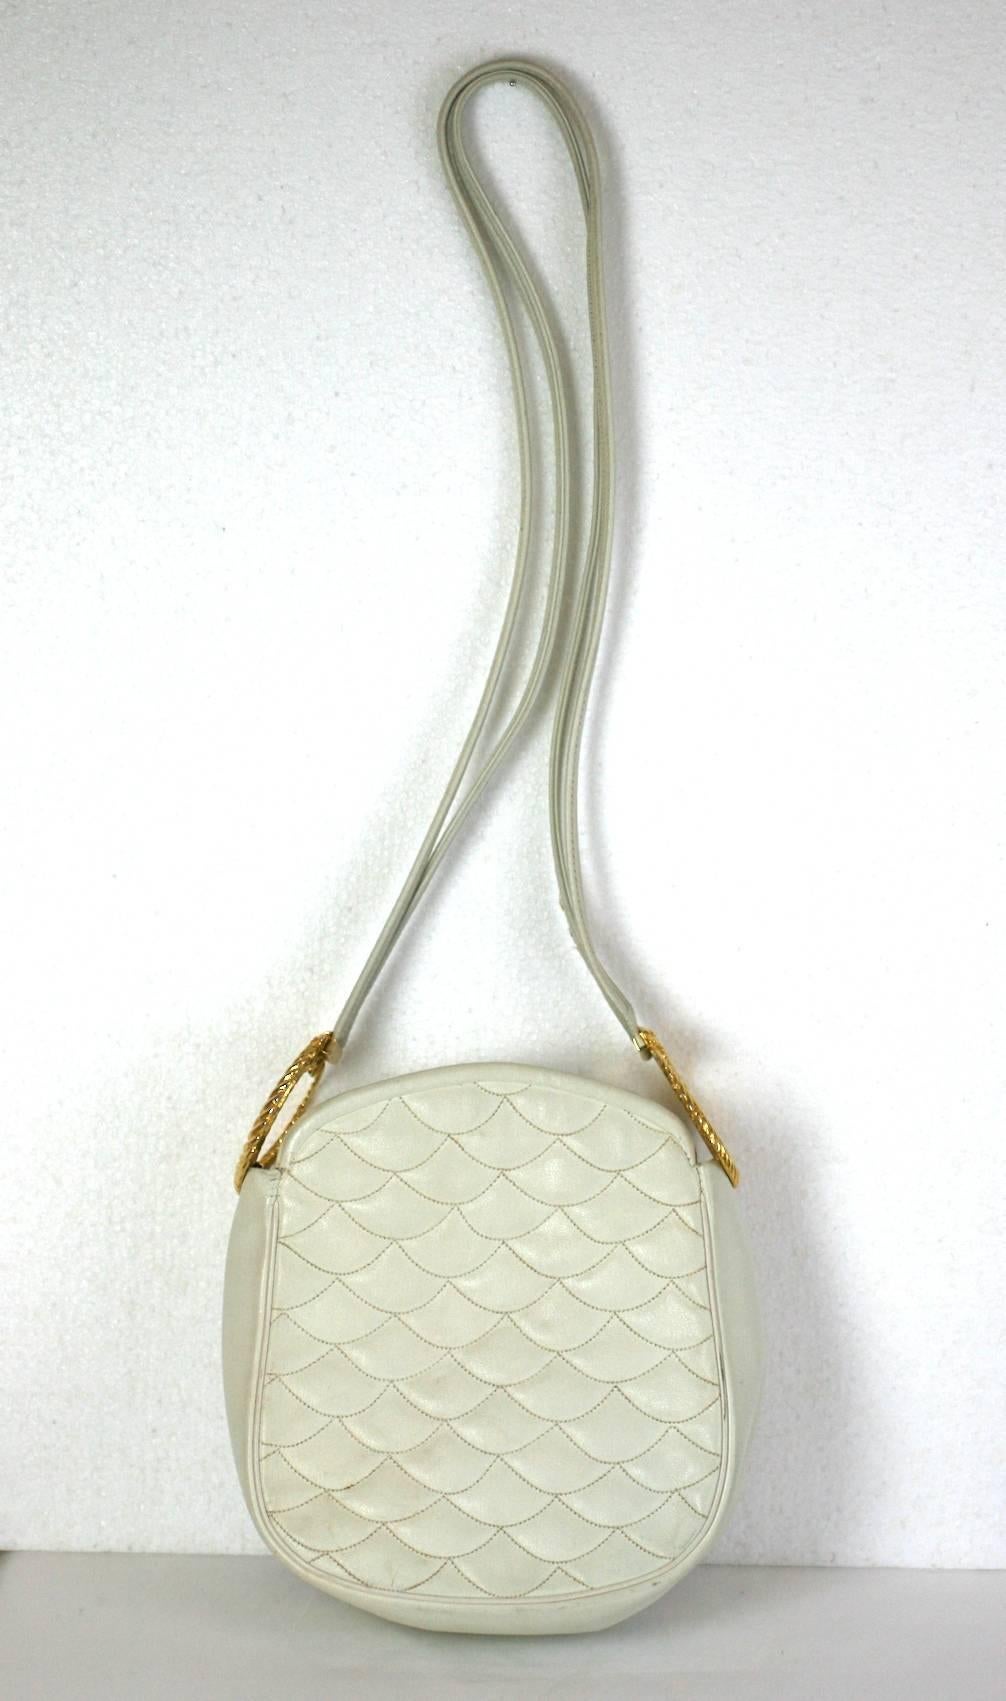 Harry Rosenfeld ivory leather shoulder bag with swirled gilt lion hilts suspending long shoulder straps. Ivory leather is wave quilted on body. An attached coin purse is on the interior. Dated 1972, Harry Rosenfeld.  Body 7